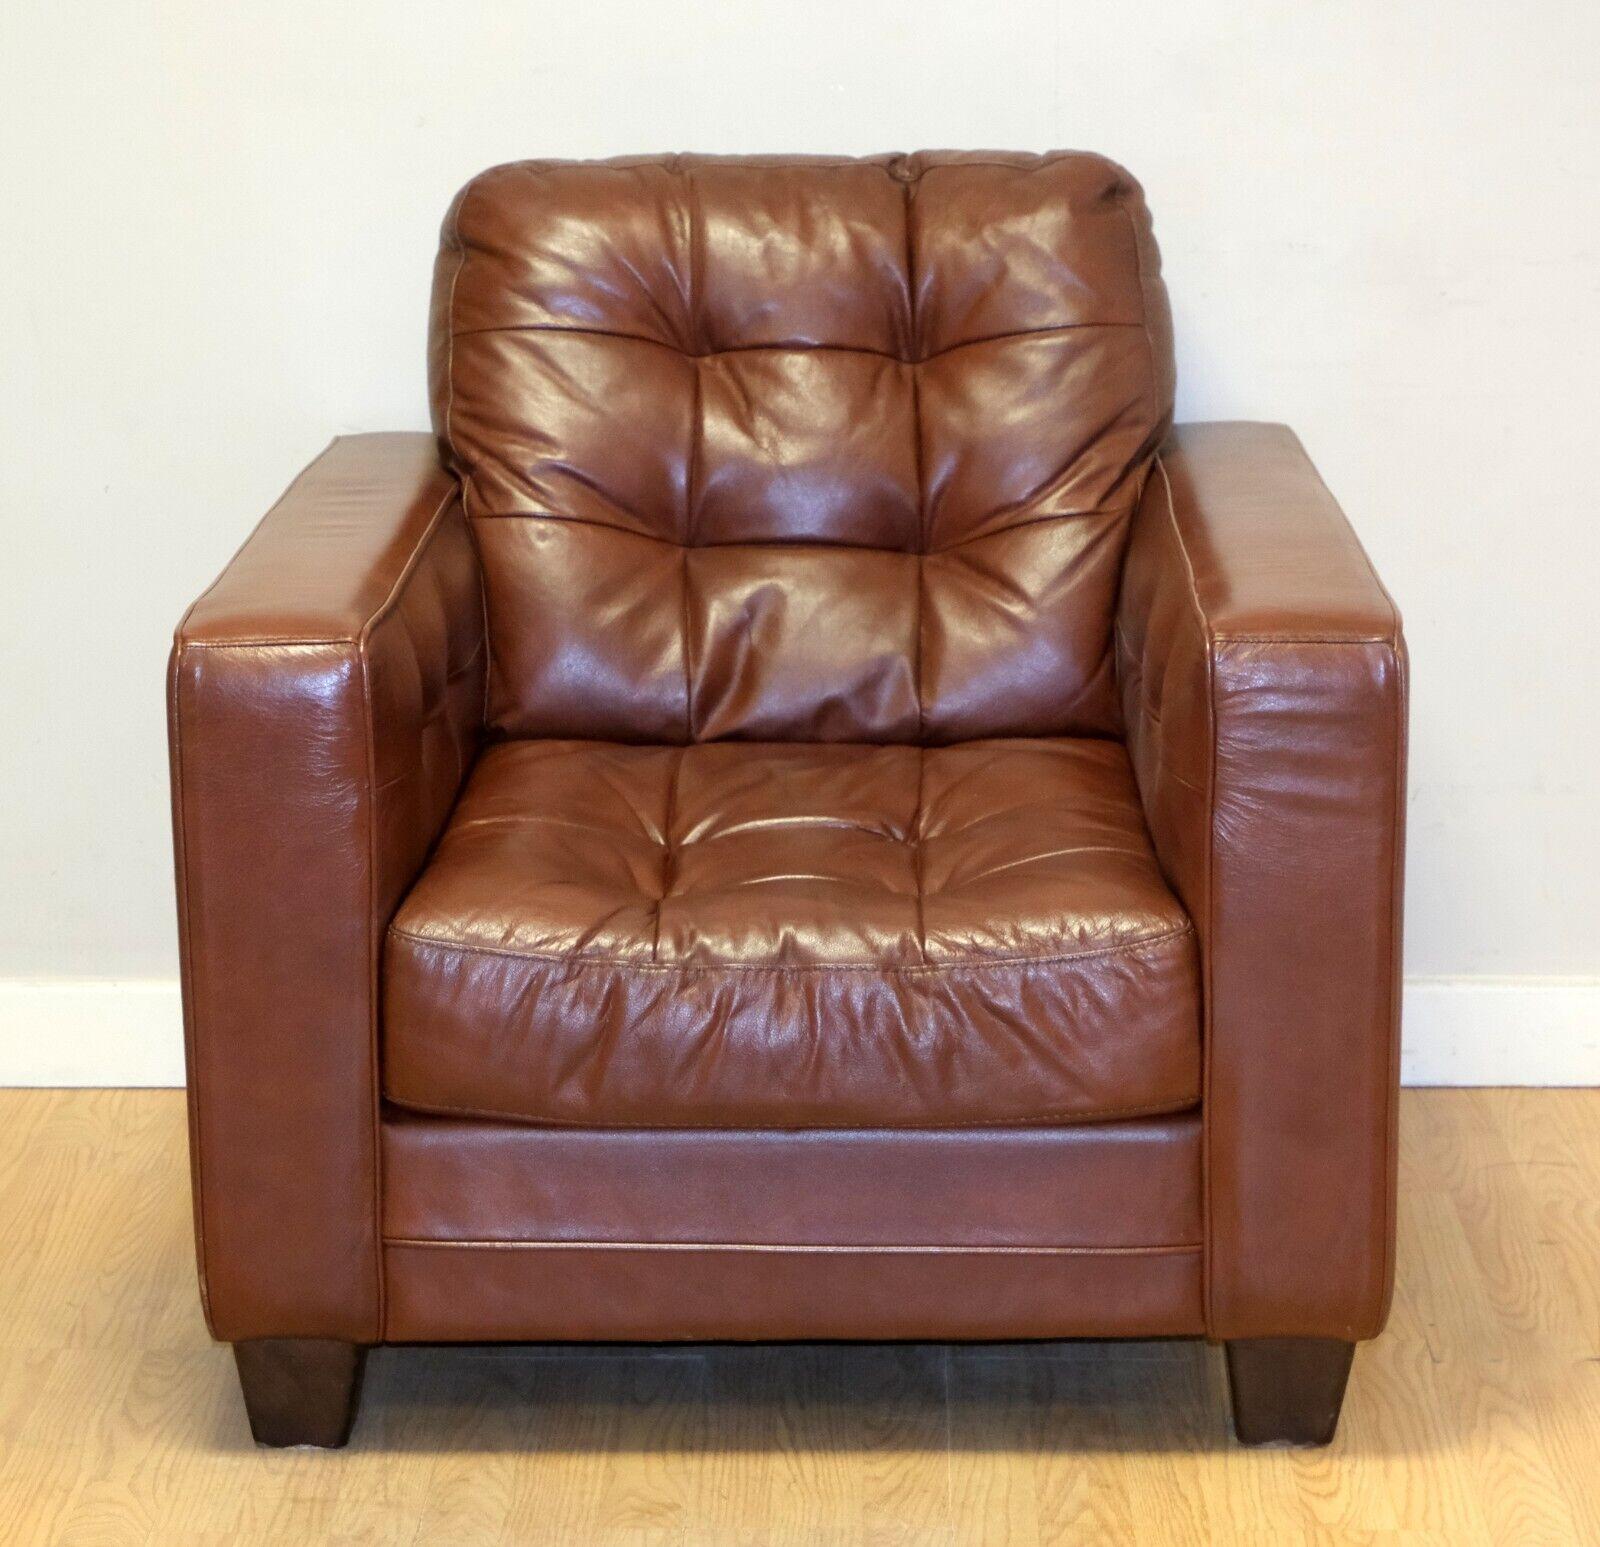 We are delighted to offer for sale this lovely Knoll style brown leather armchair with chesterfield style buttoning.  

This piece is good looking and super comfortable,  everything compliments with the soft leather. The Knoll style makes it very